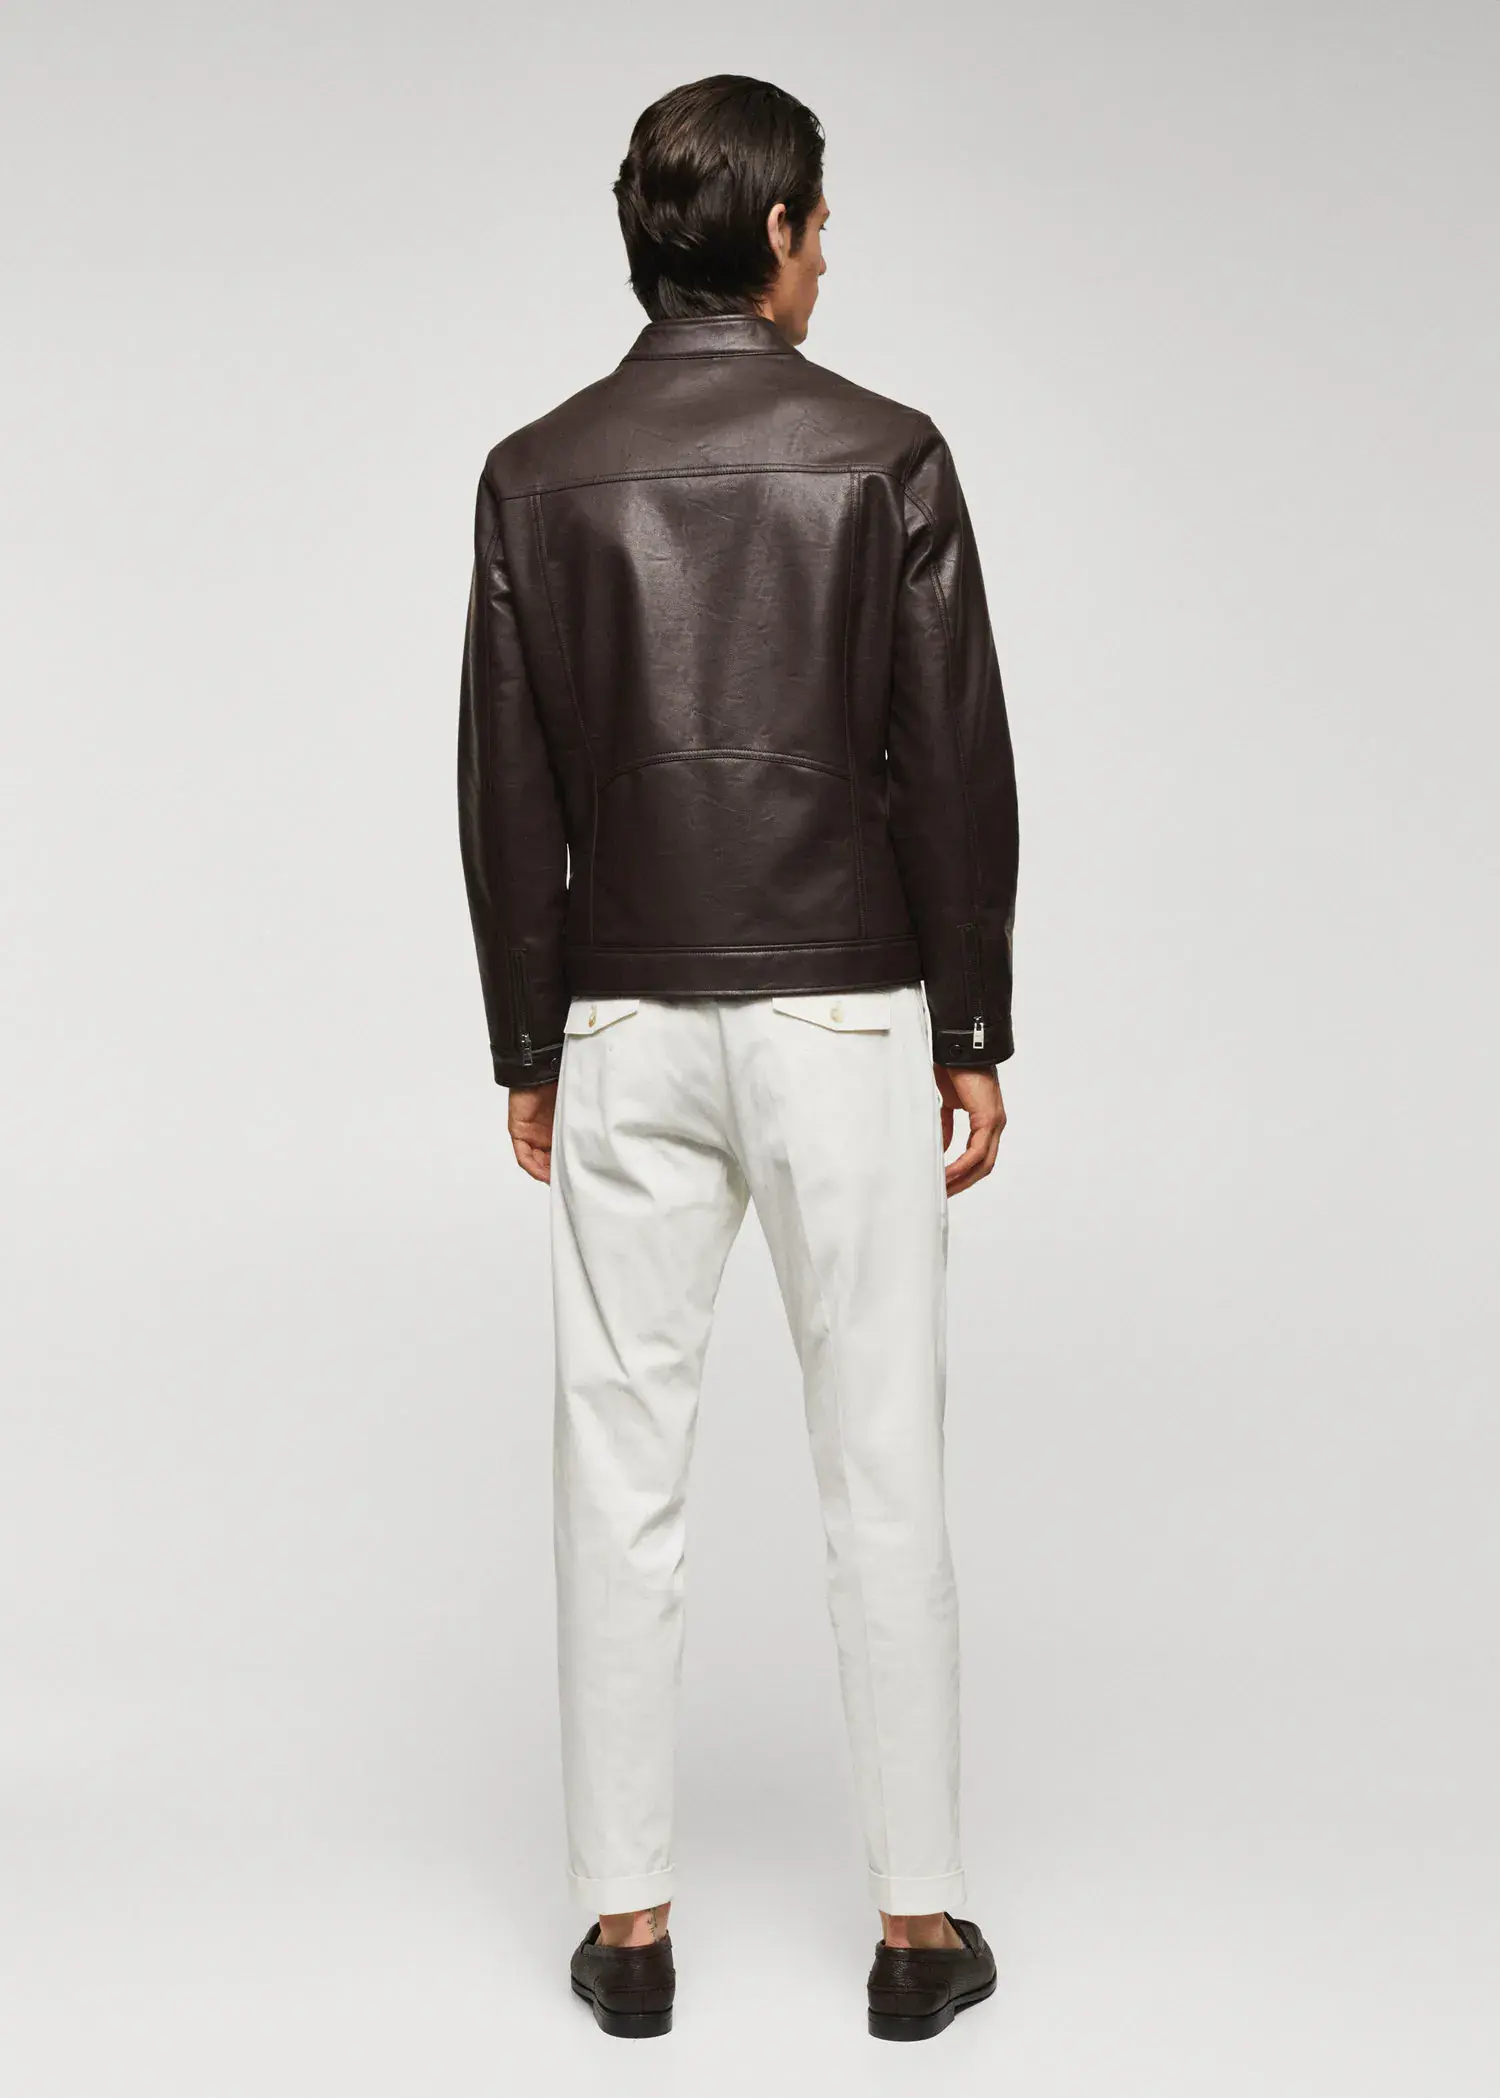 Mango Leather-effect jacket with zippers. 3